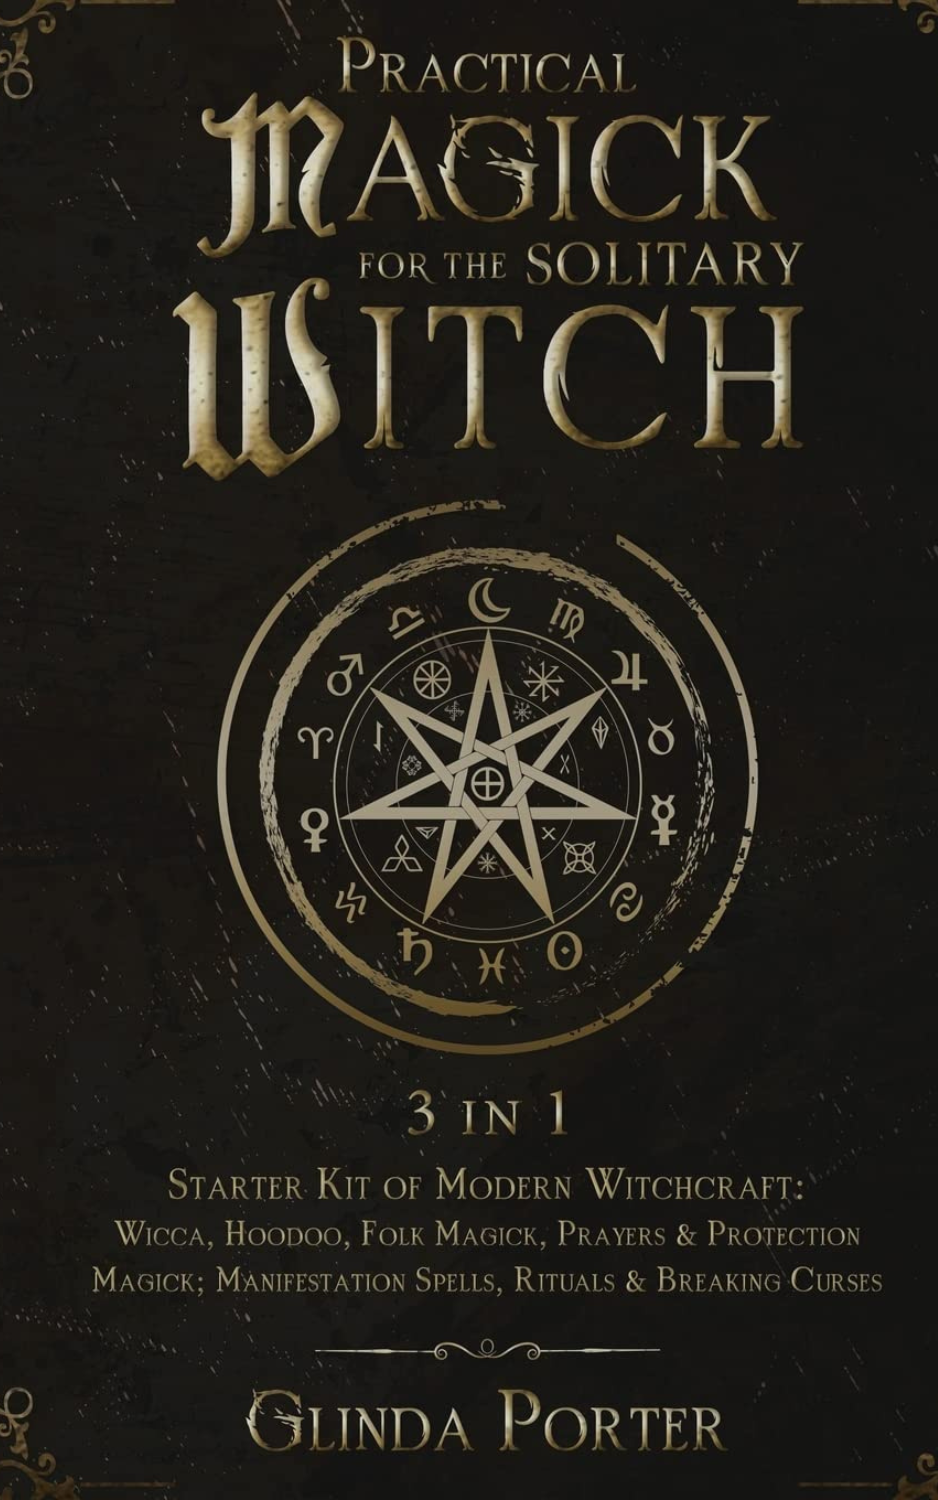 Practical Magick for the Solitary Witch (3 in 1)